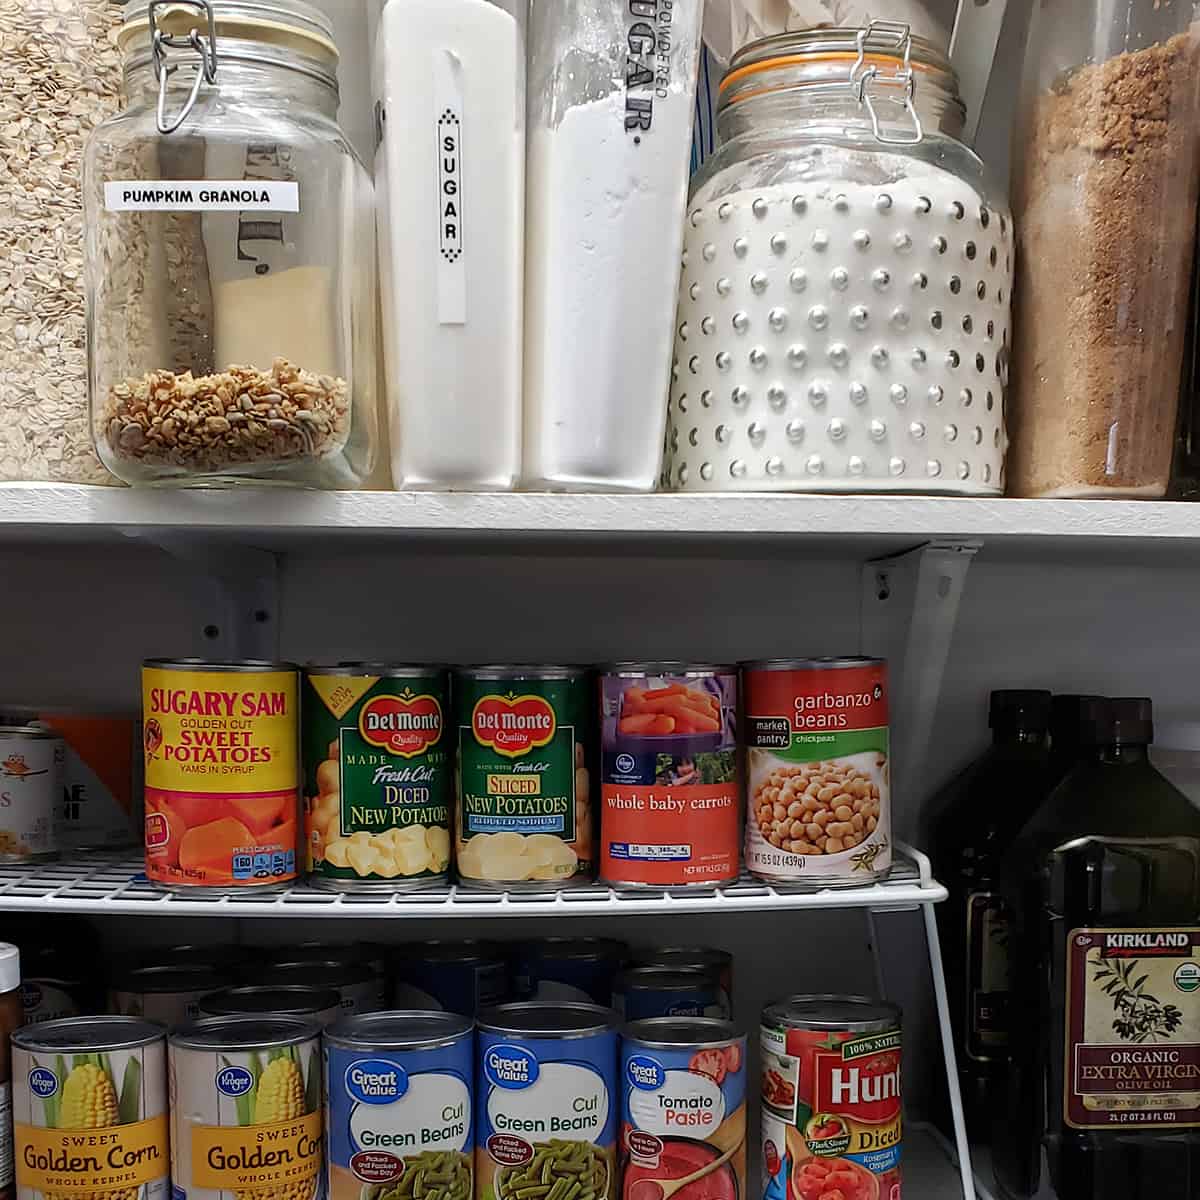 How To Organize an Overcrowded Pantry